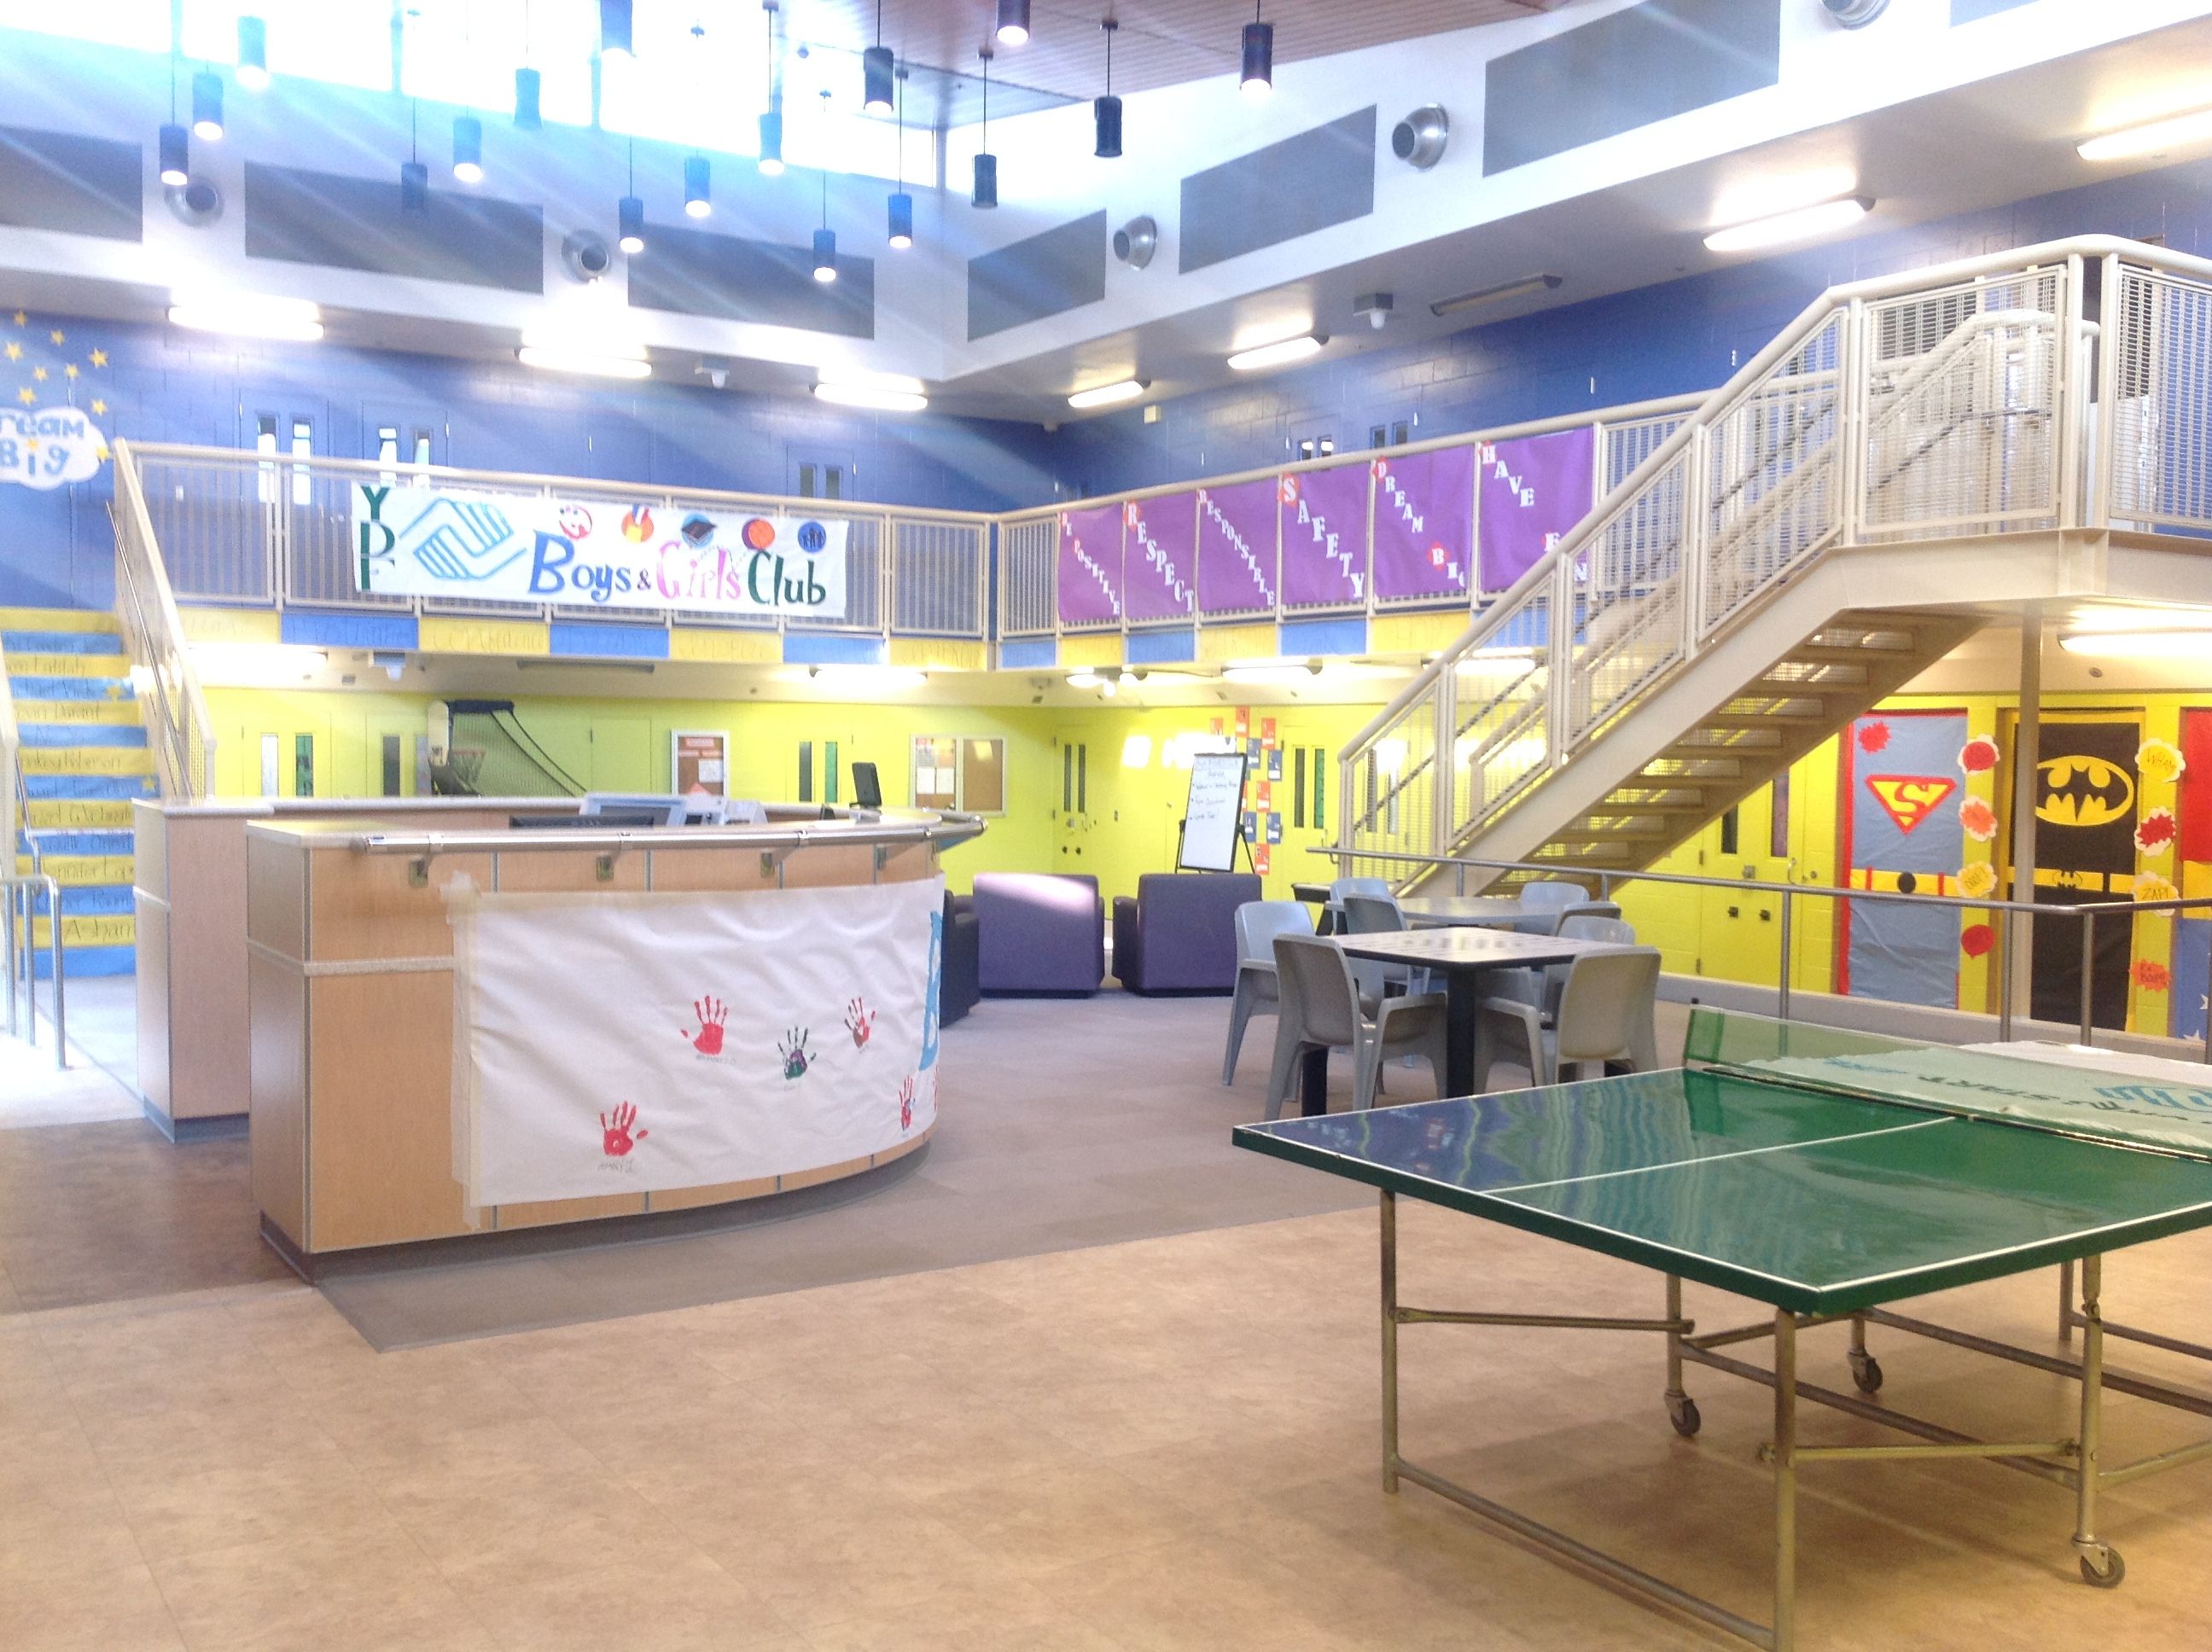 Youth Detention Facility Boys & Girls Club Chosen as Top 10 Finalist in National Contest